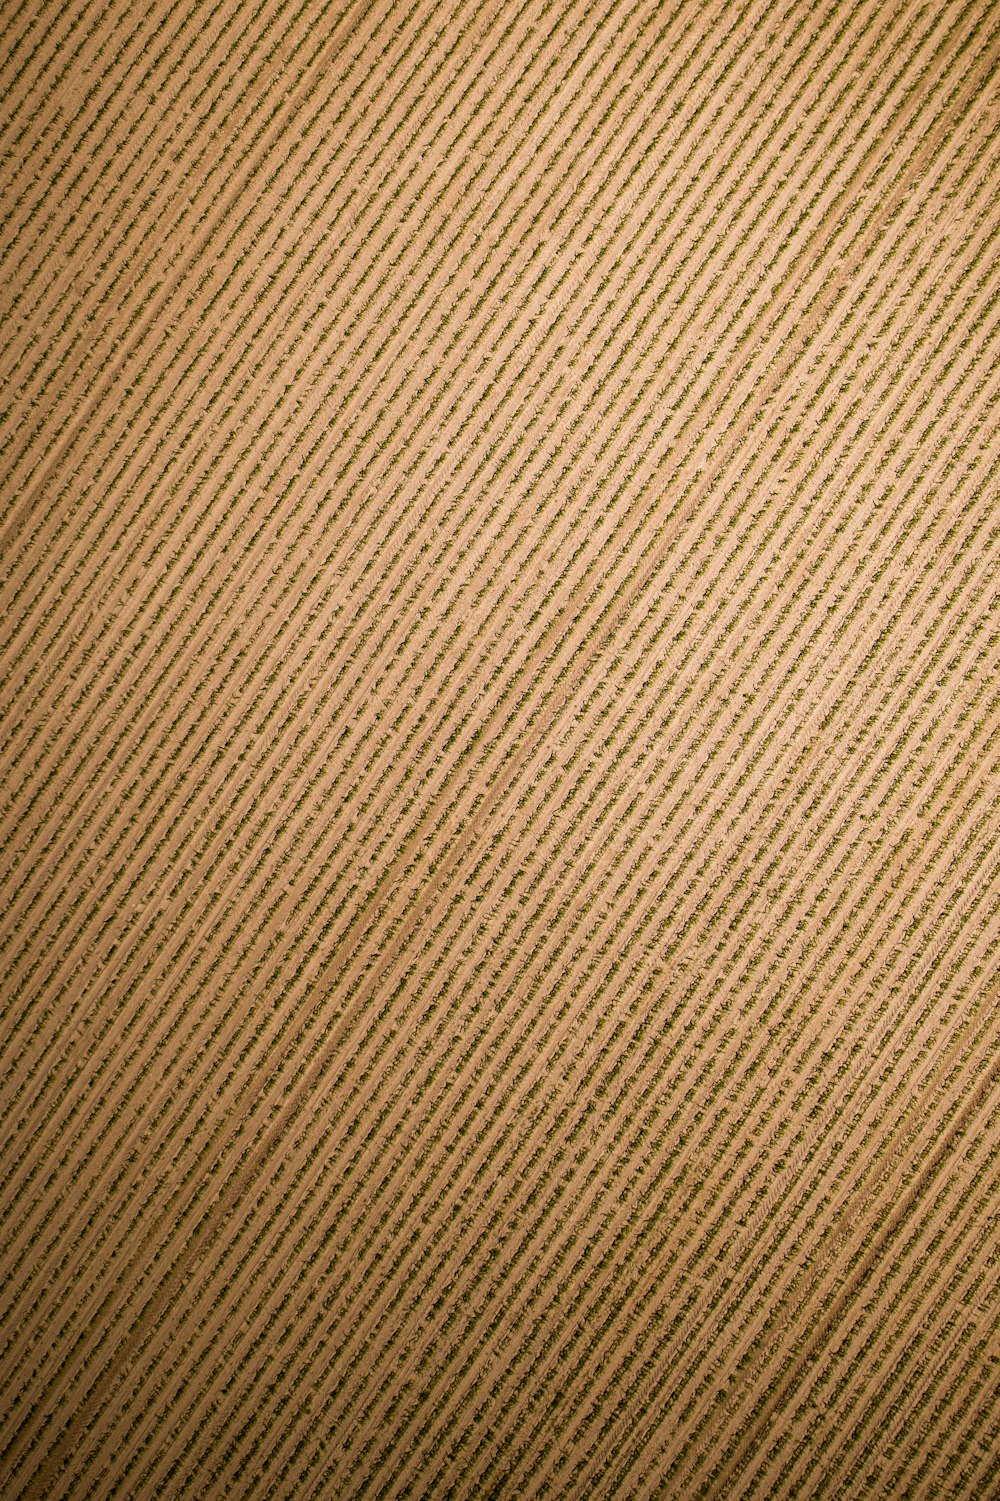 a close up of a brown cardboard texture